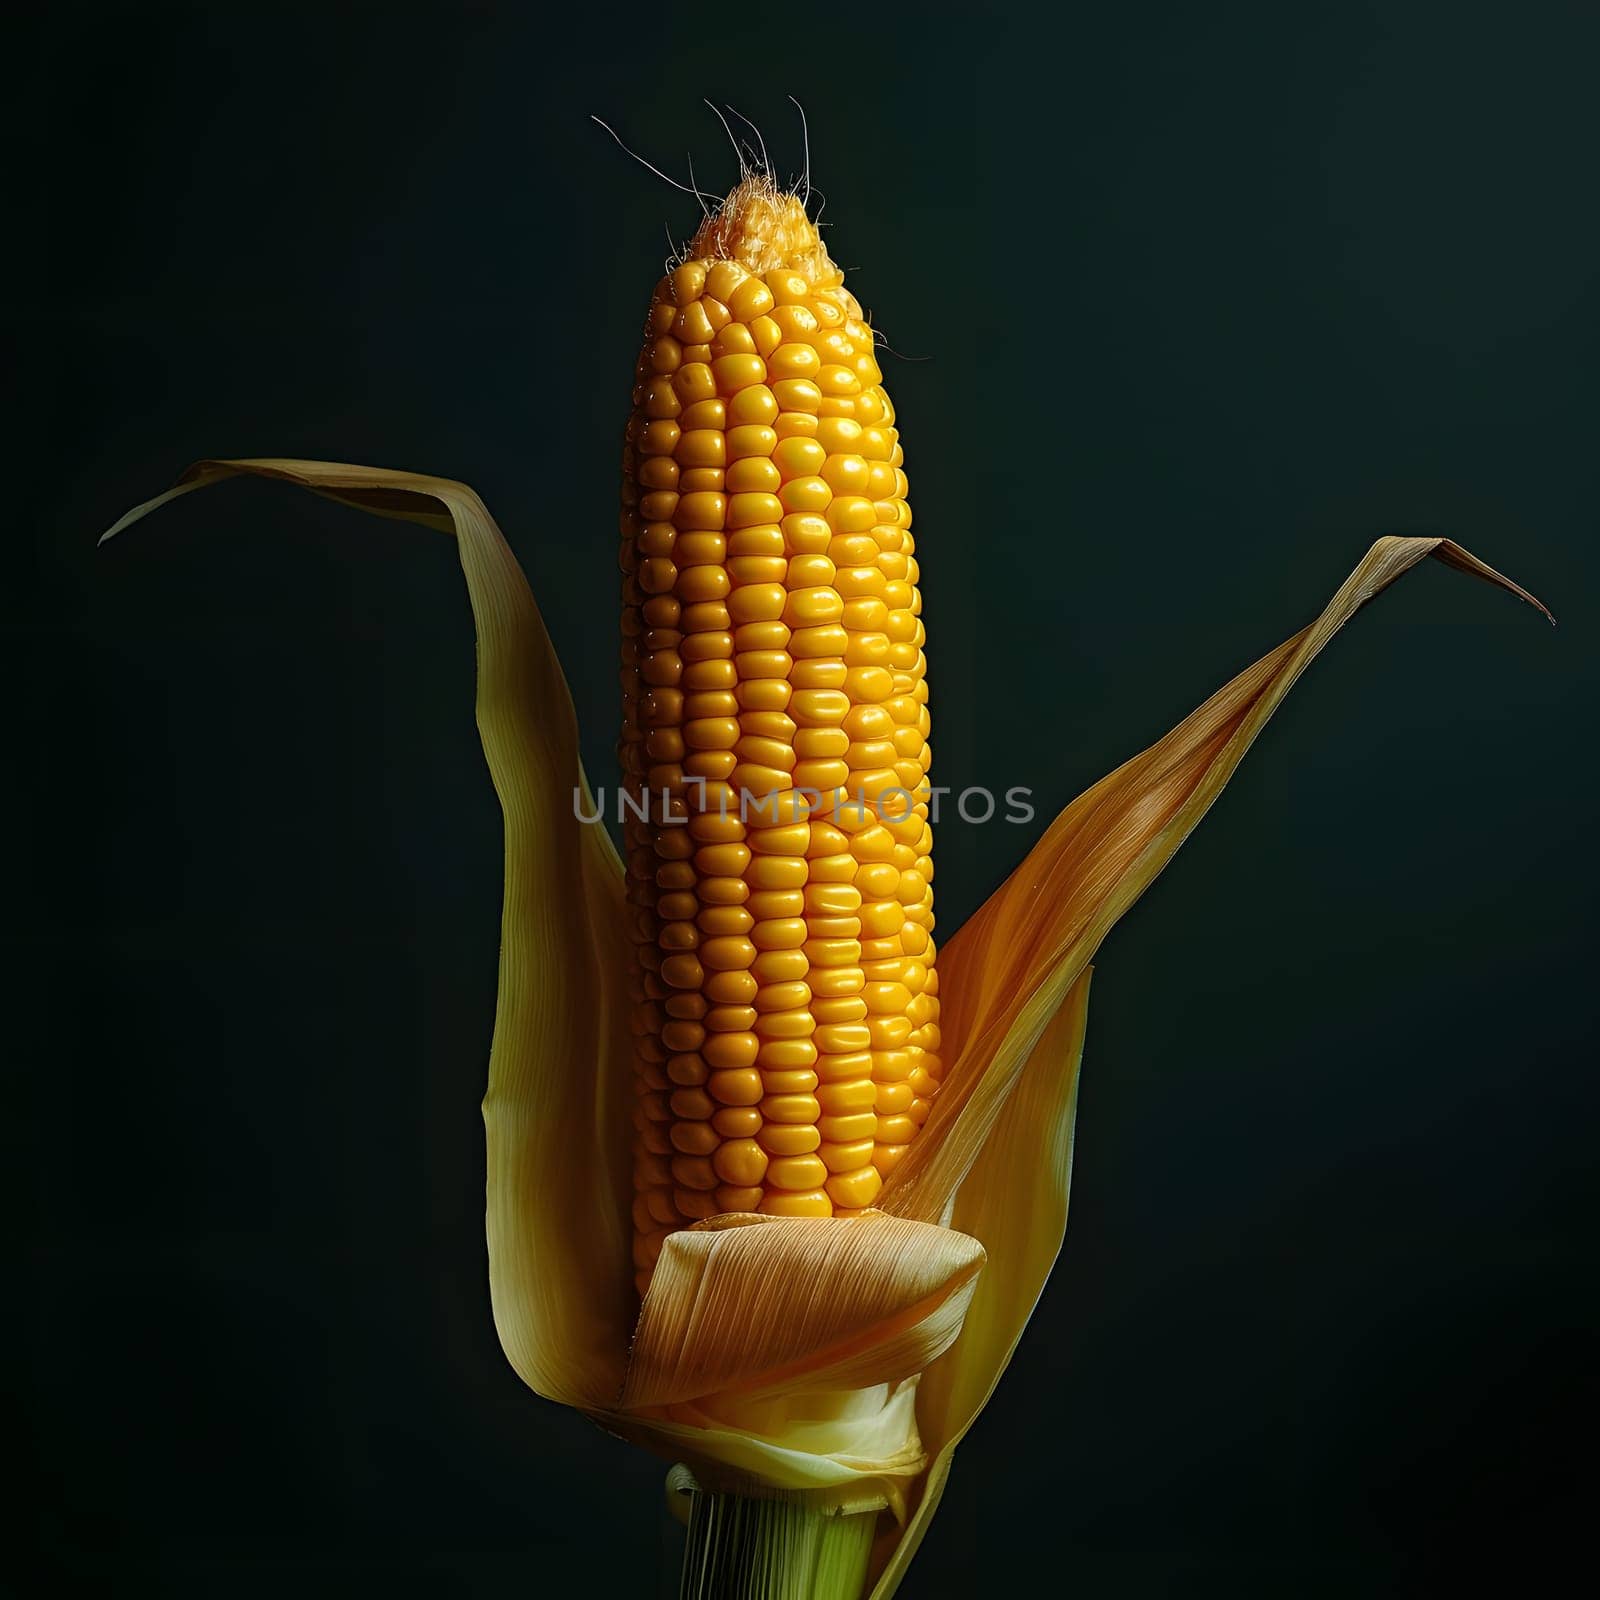 Growing yellow cob, corn with leaves, isolated on a dark background. Corn as a dish of thanksgiving for the harvest. An atmosphere of joy and celebration.